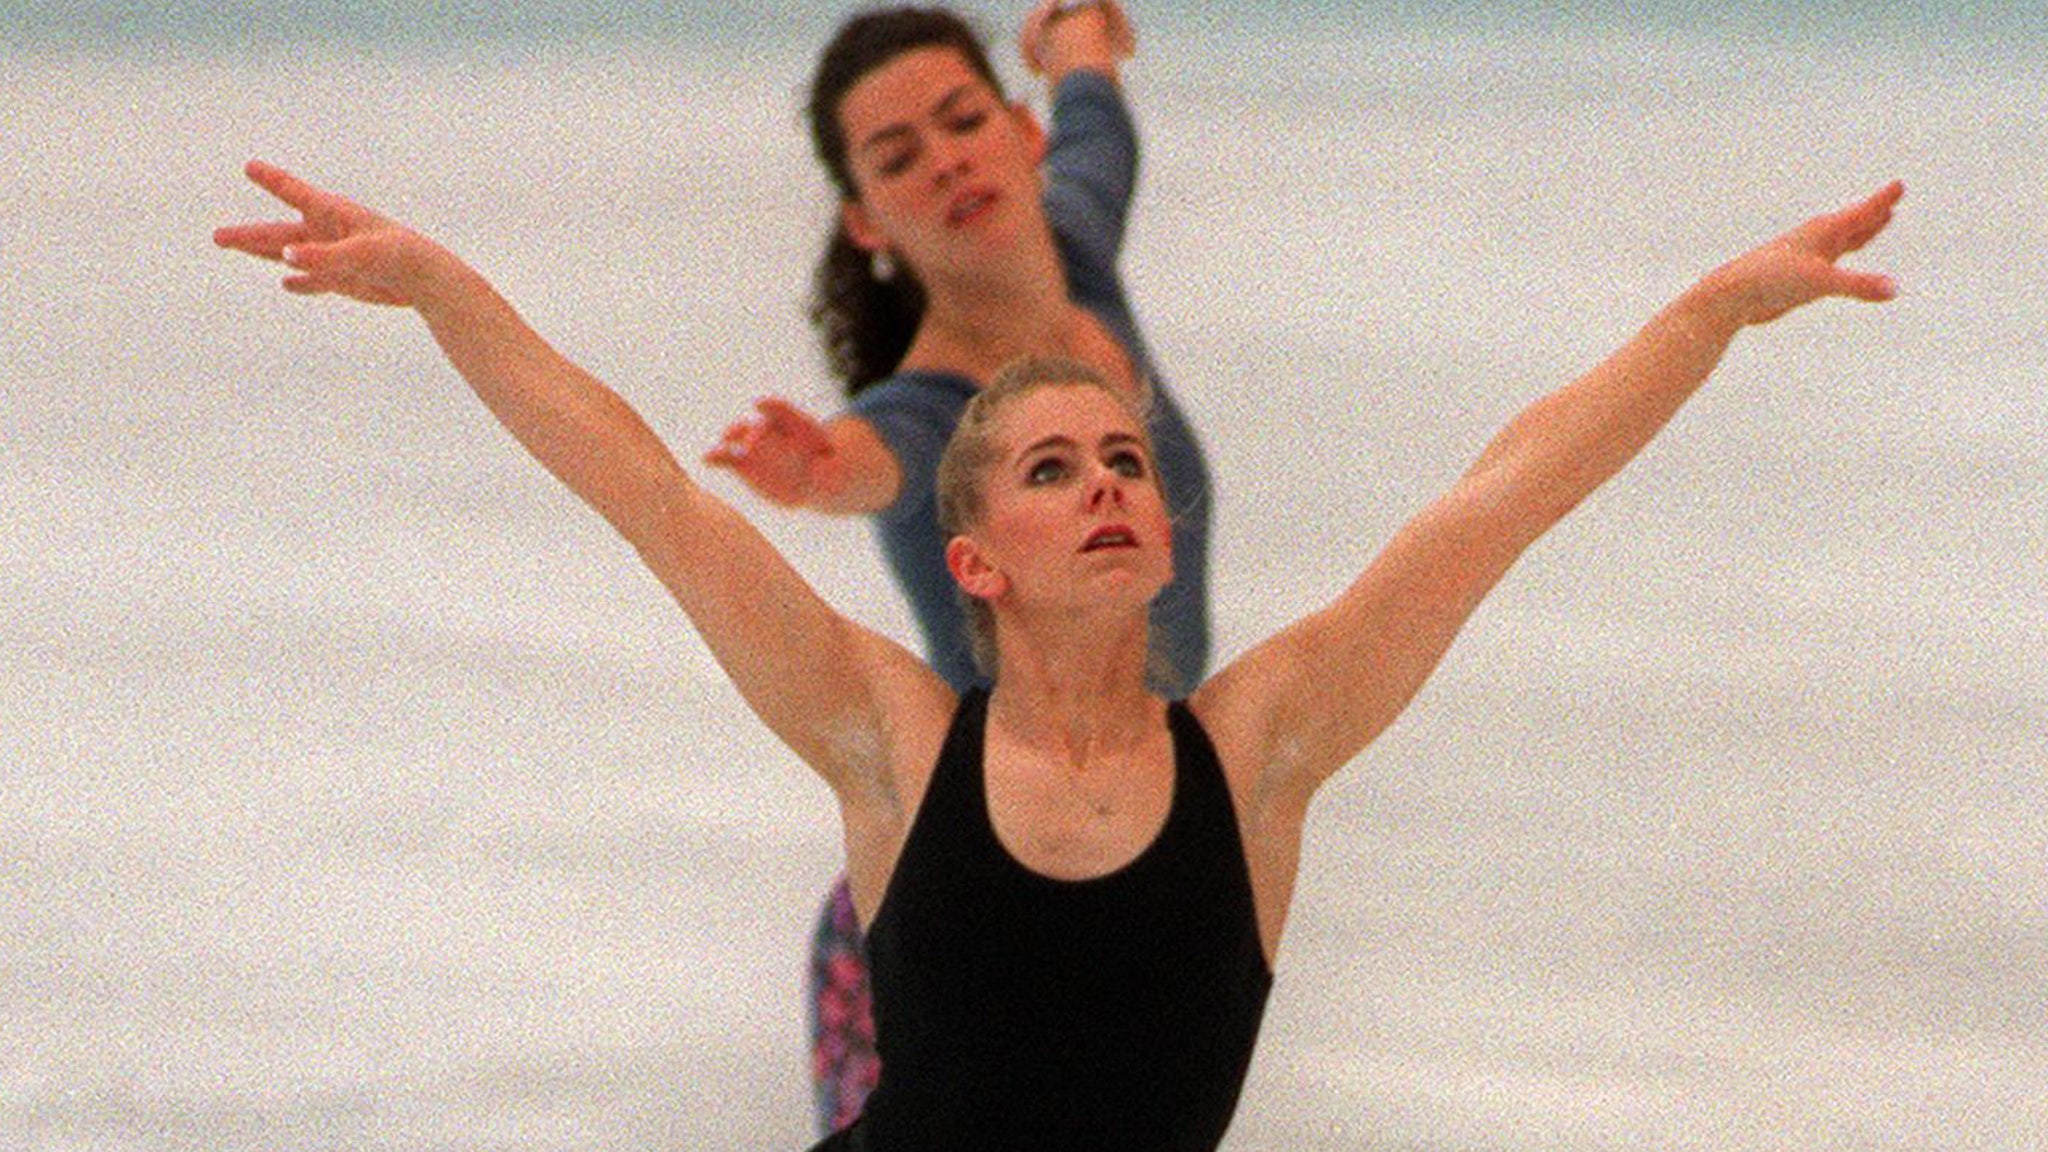 8 Crazy Things You Probably Forgot About The Tonya Harding Scandal